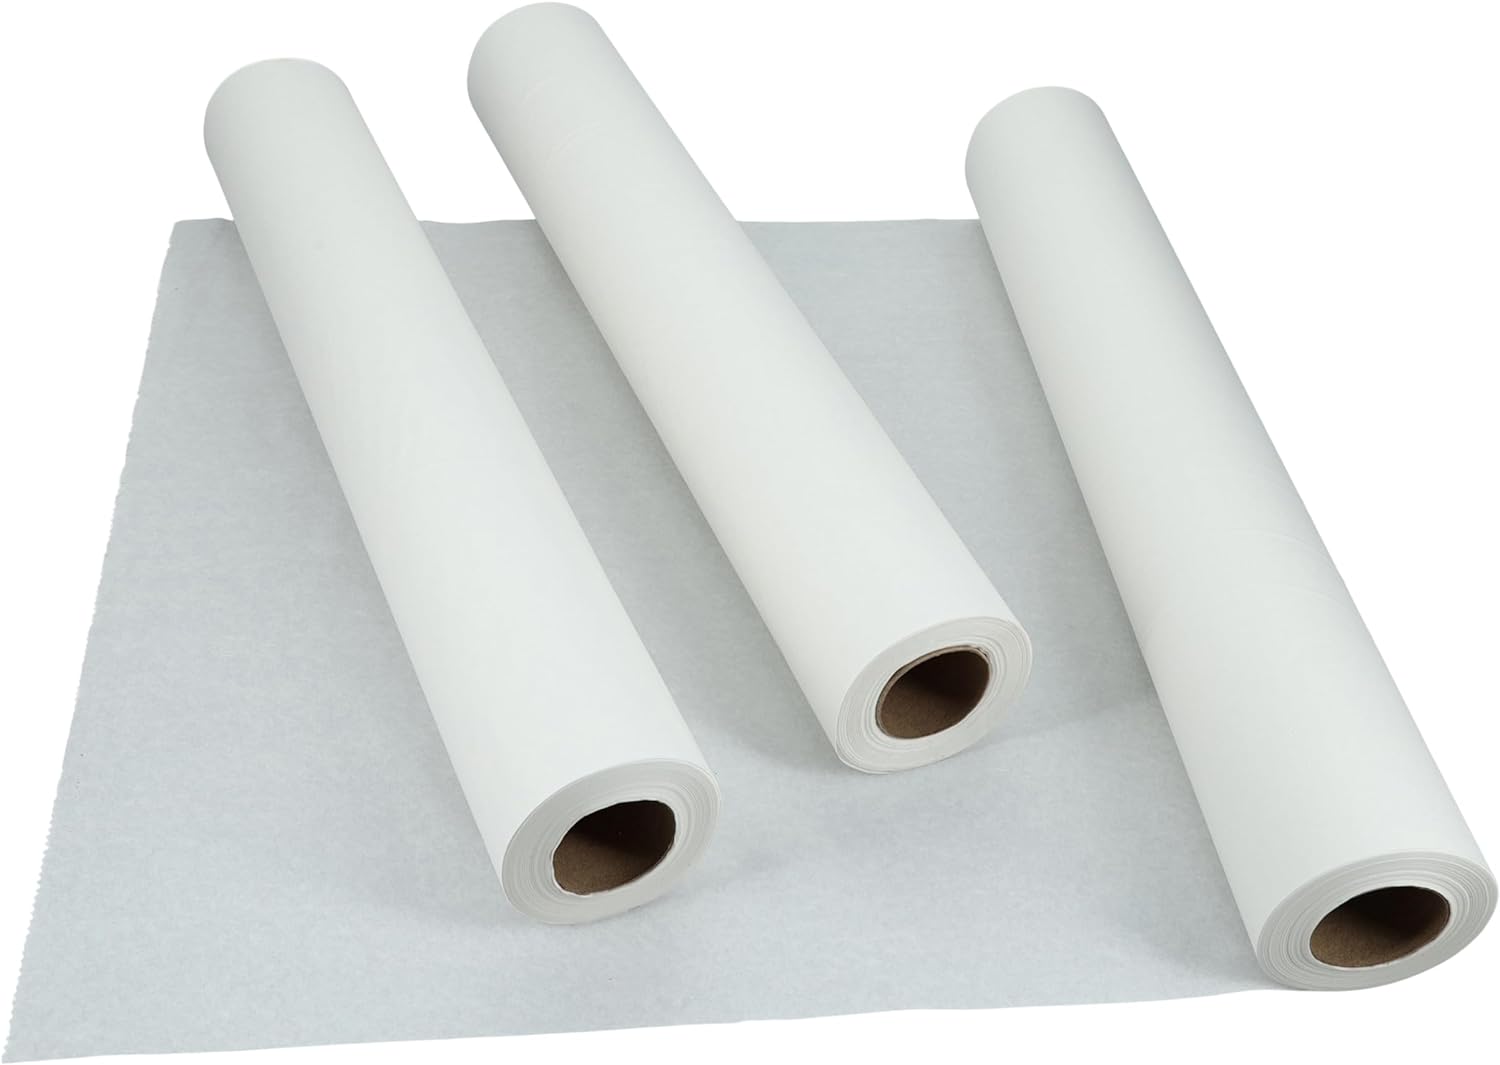 Henry Schein Exam Table Paper Smooth White Smooth Disposable Paper Roll for Patient Protection